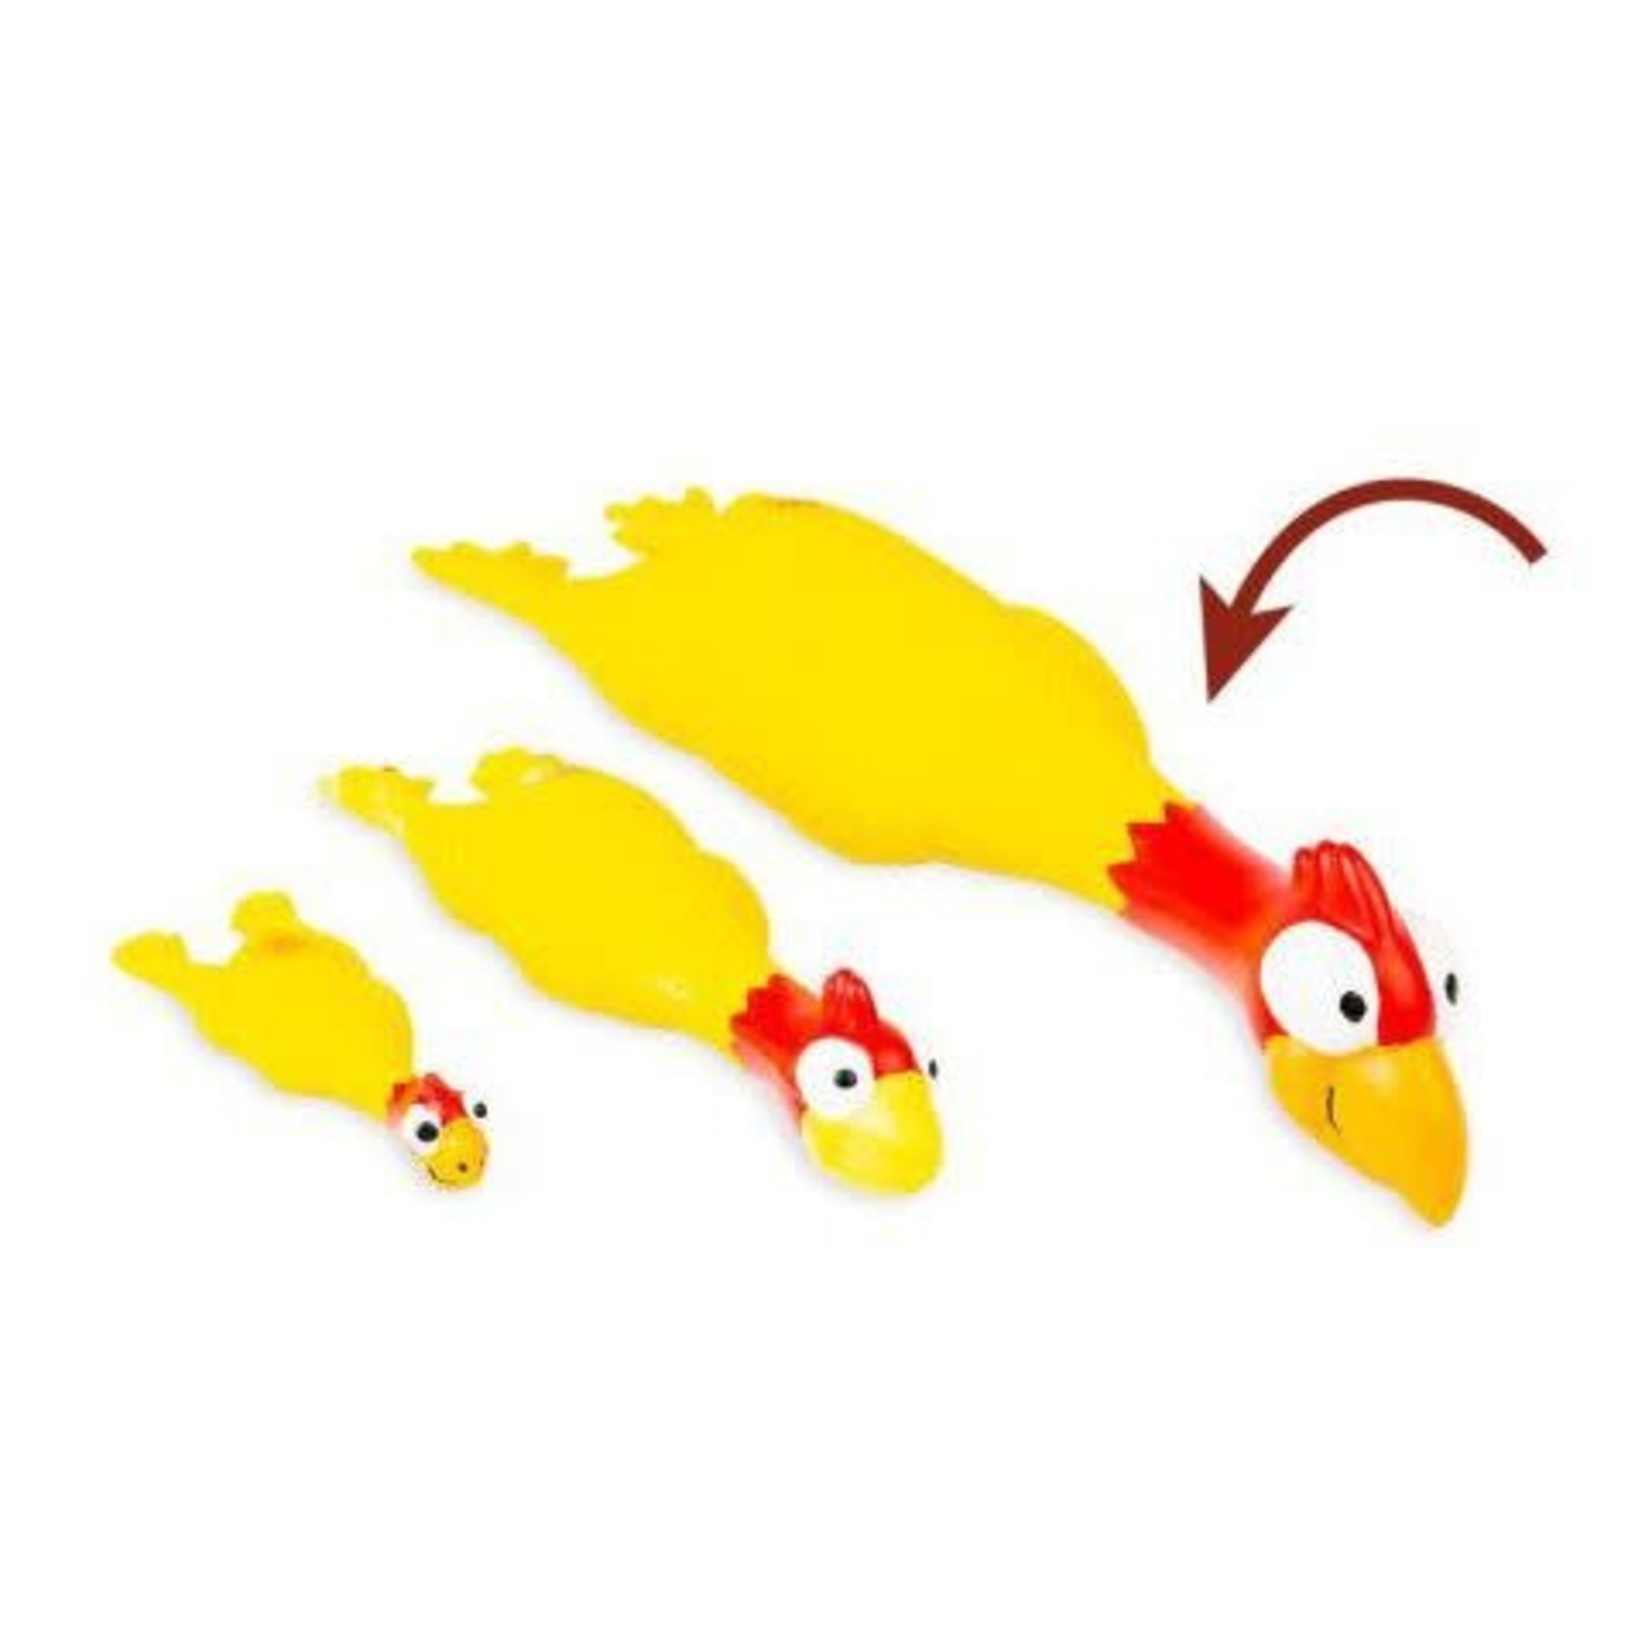 BUD-Z Bud-Z Latex large Chicken Squeaker Yellow Dog 16.9in